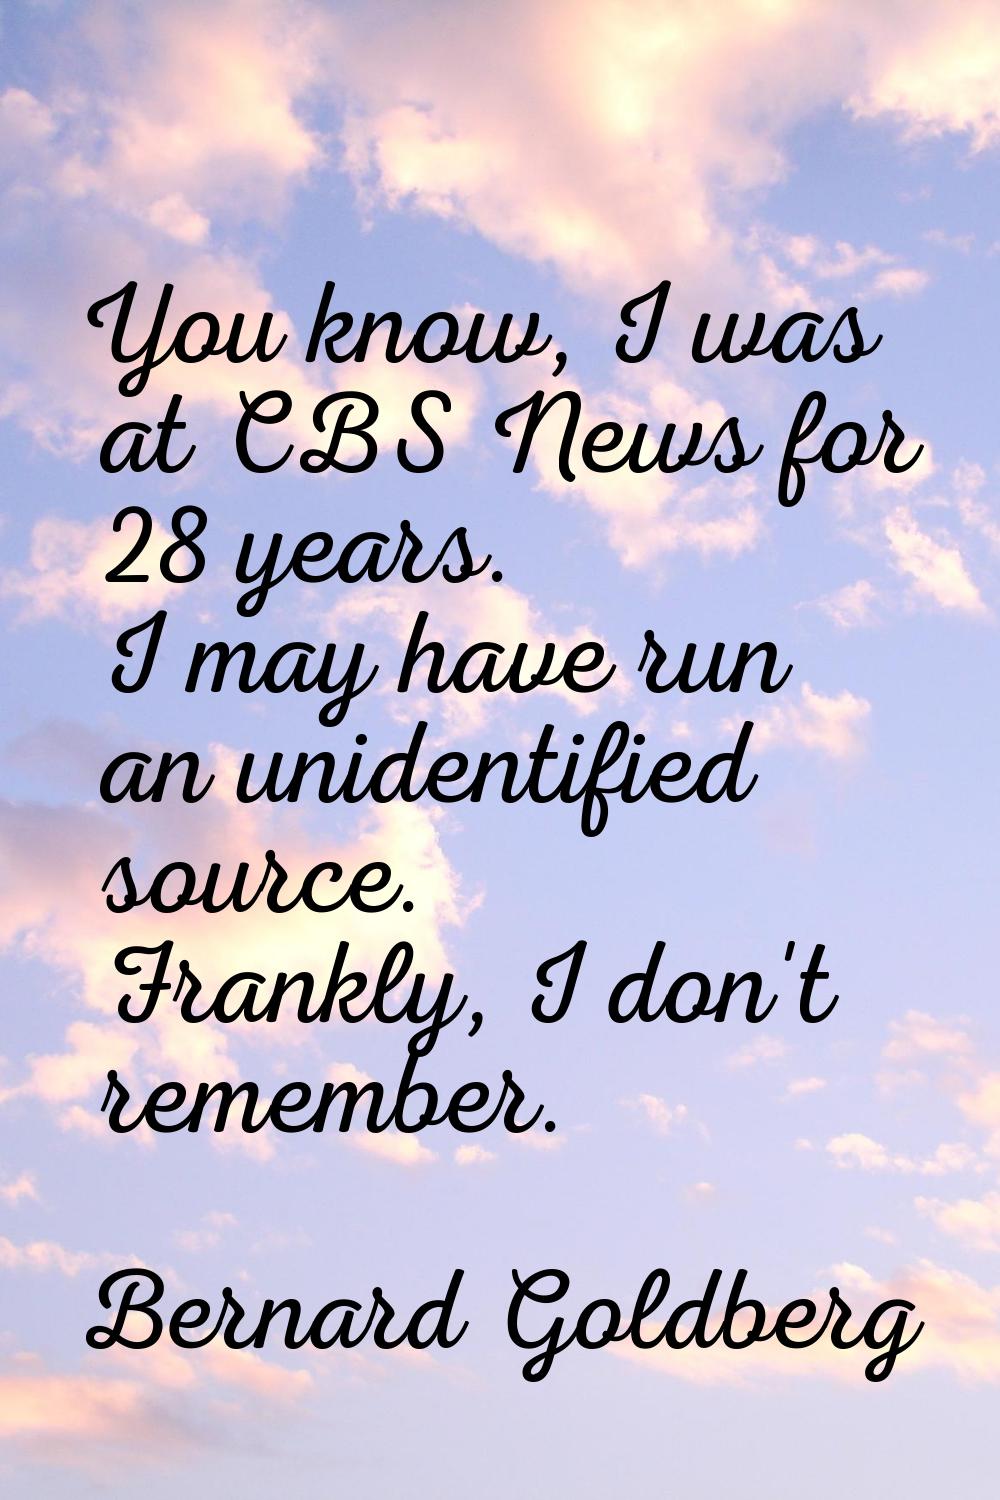 You know, I was at CBS News for 28 years. I may have run an unidentified source. Frankly, I don't r